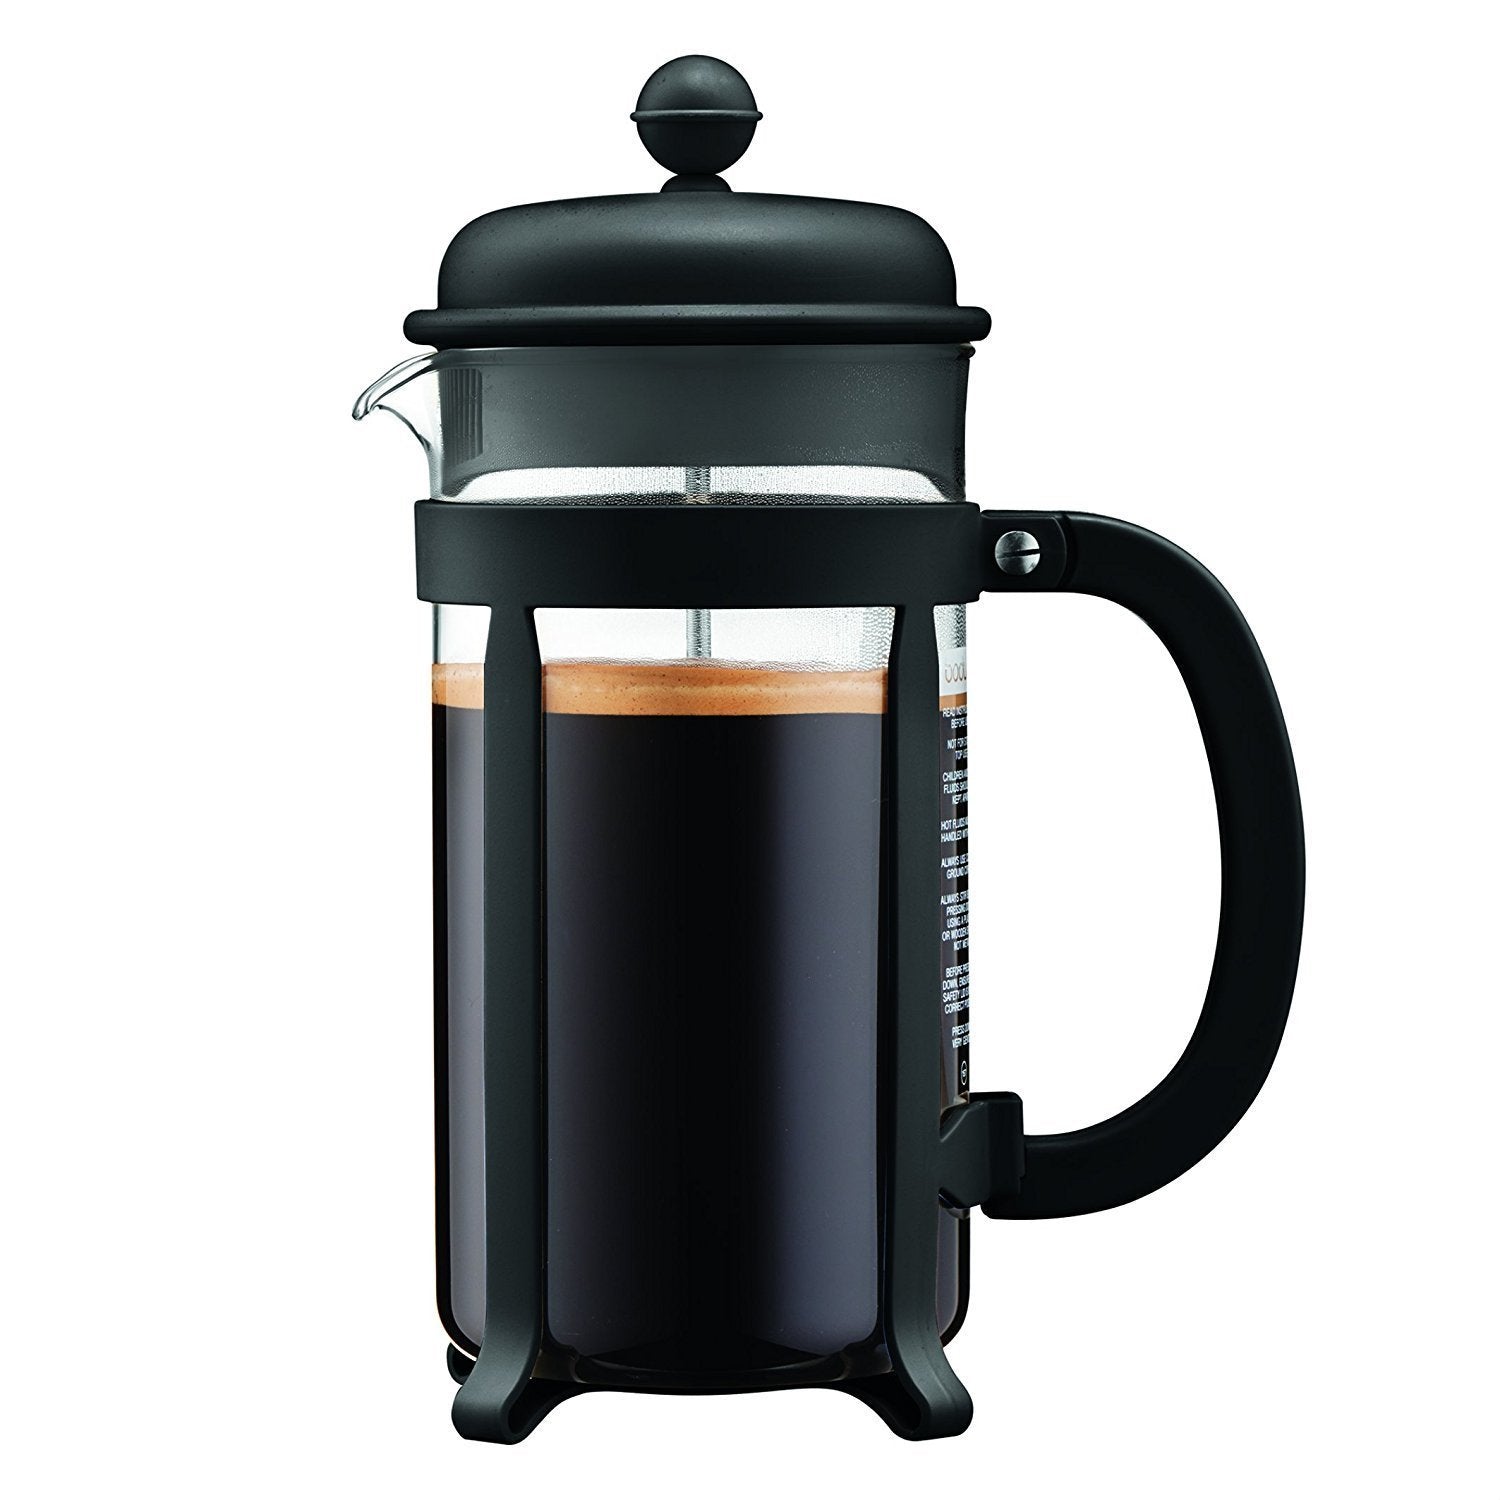 Bodum - The best cold coffee brewer 